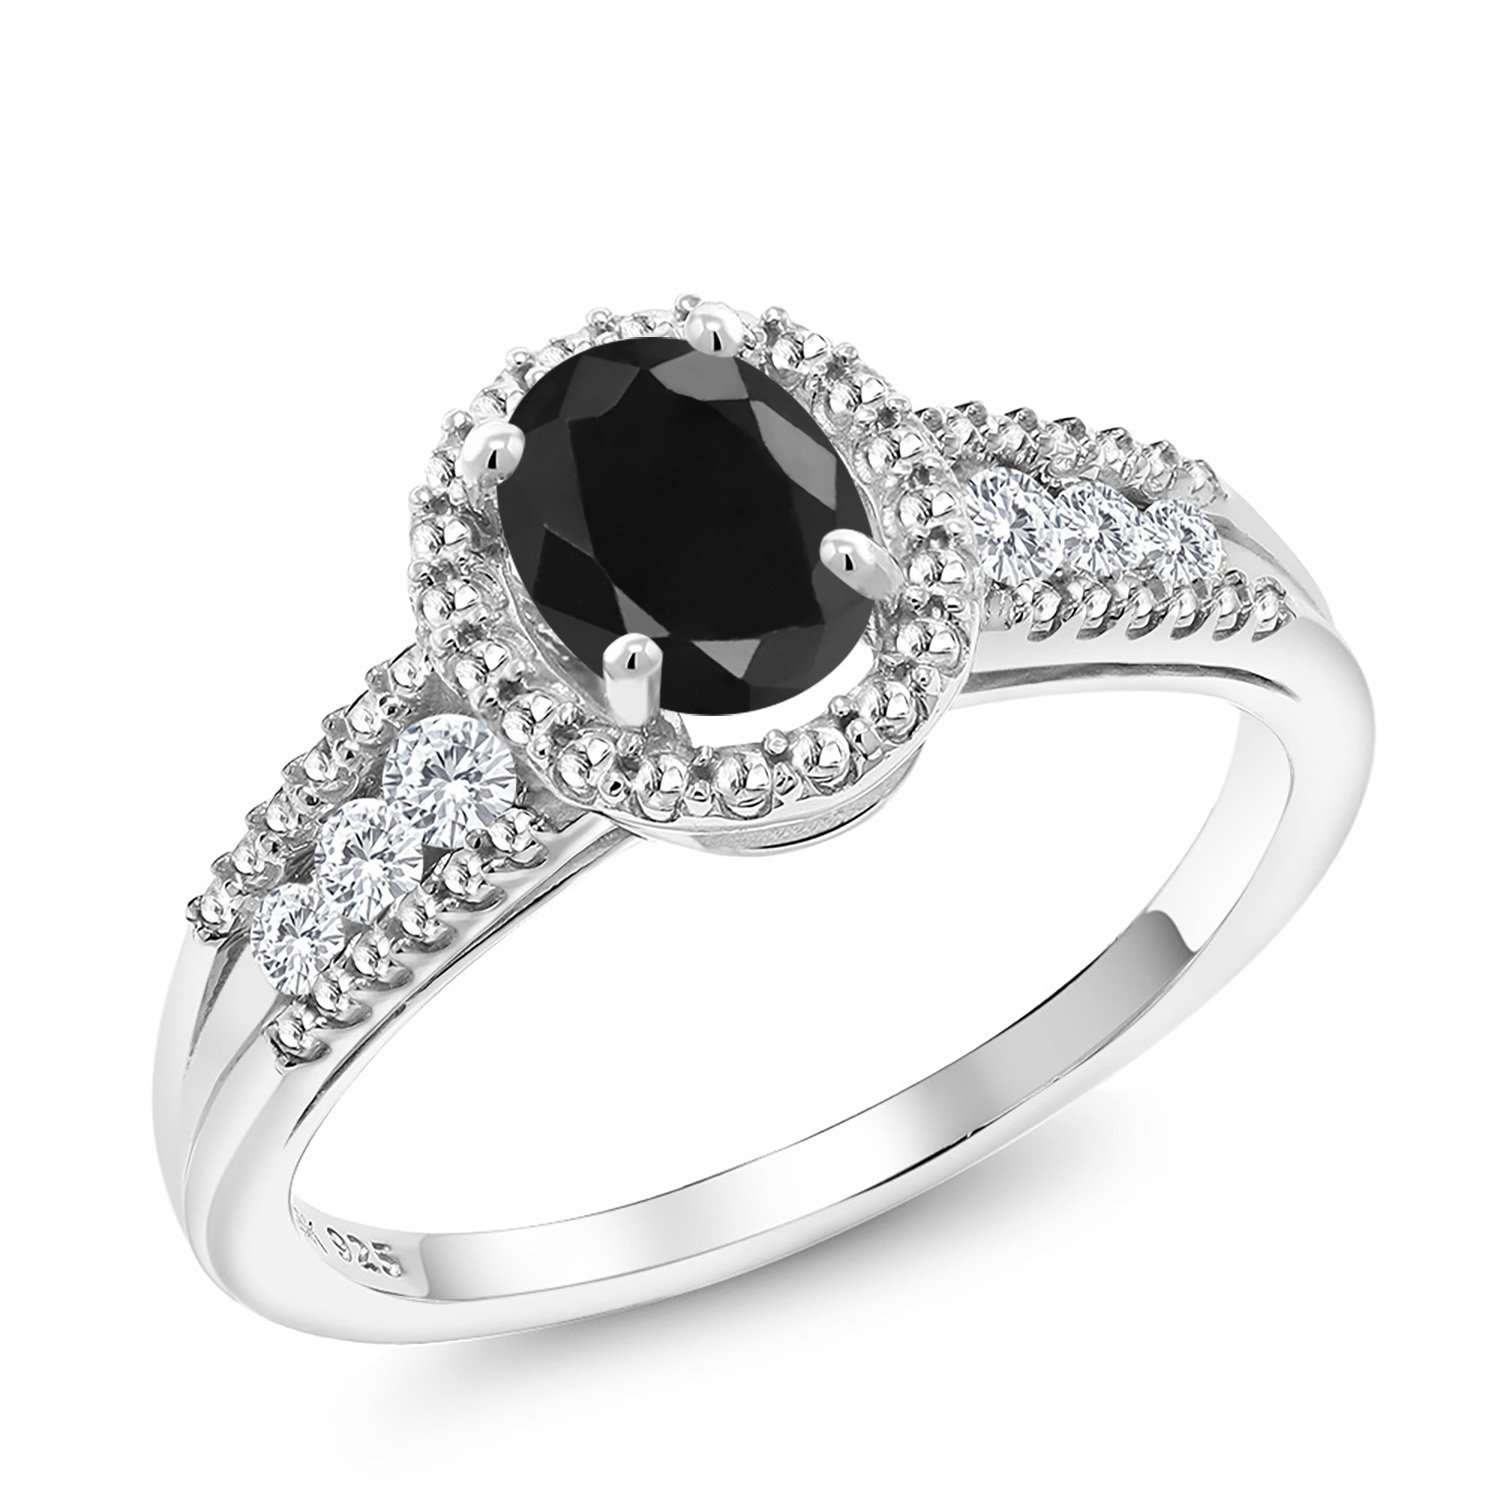 1.25 Ct Oval Black Sapphire 925 Sterling Silver Ring | Gem Stone King